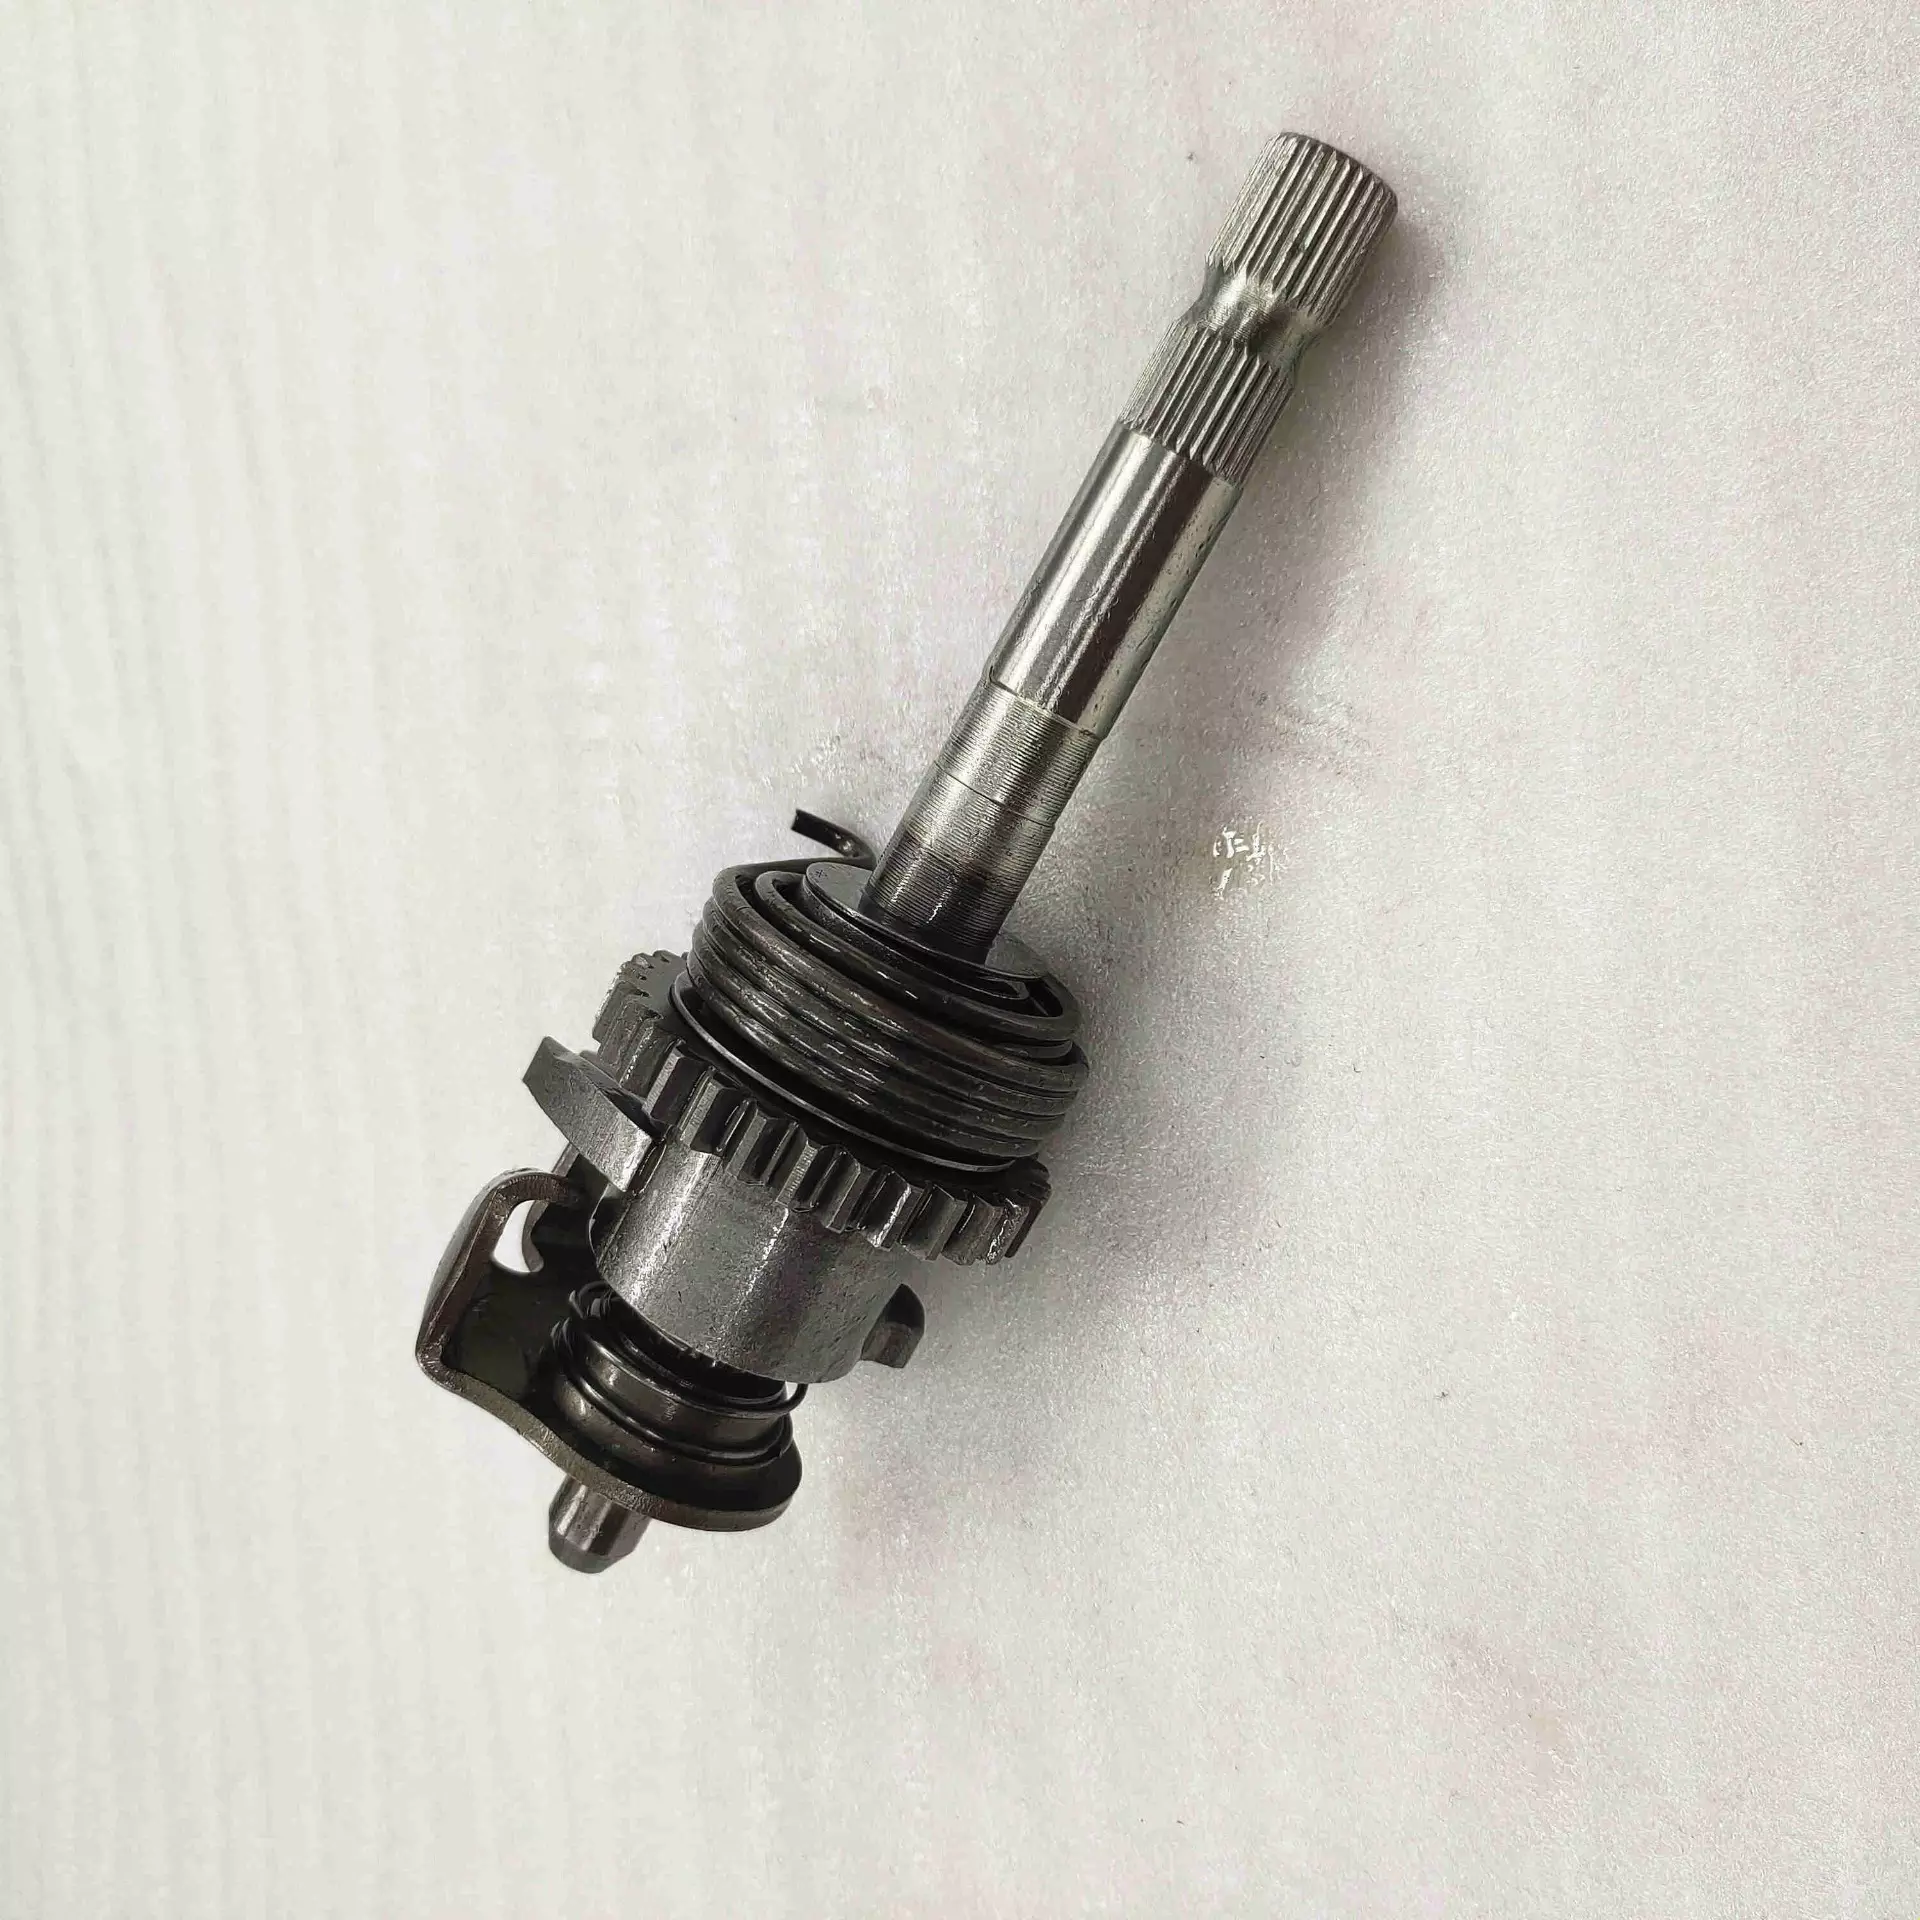 Manufacture High Quality Motorcycle Spare Parts Kick Start Shaft with Good Quality Brand New Products DAYANG Tricycle 4 Stroke